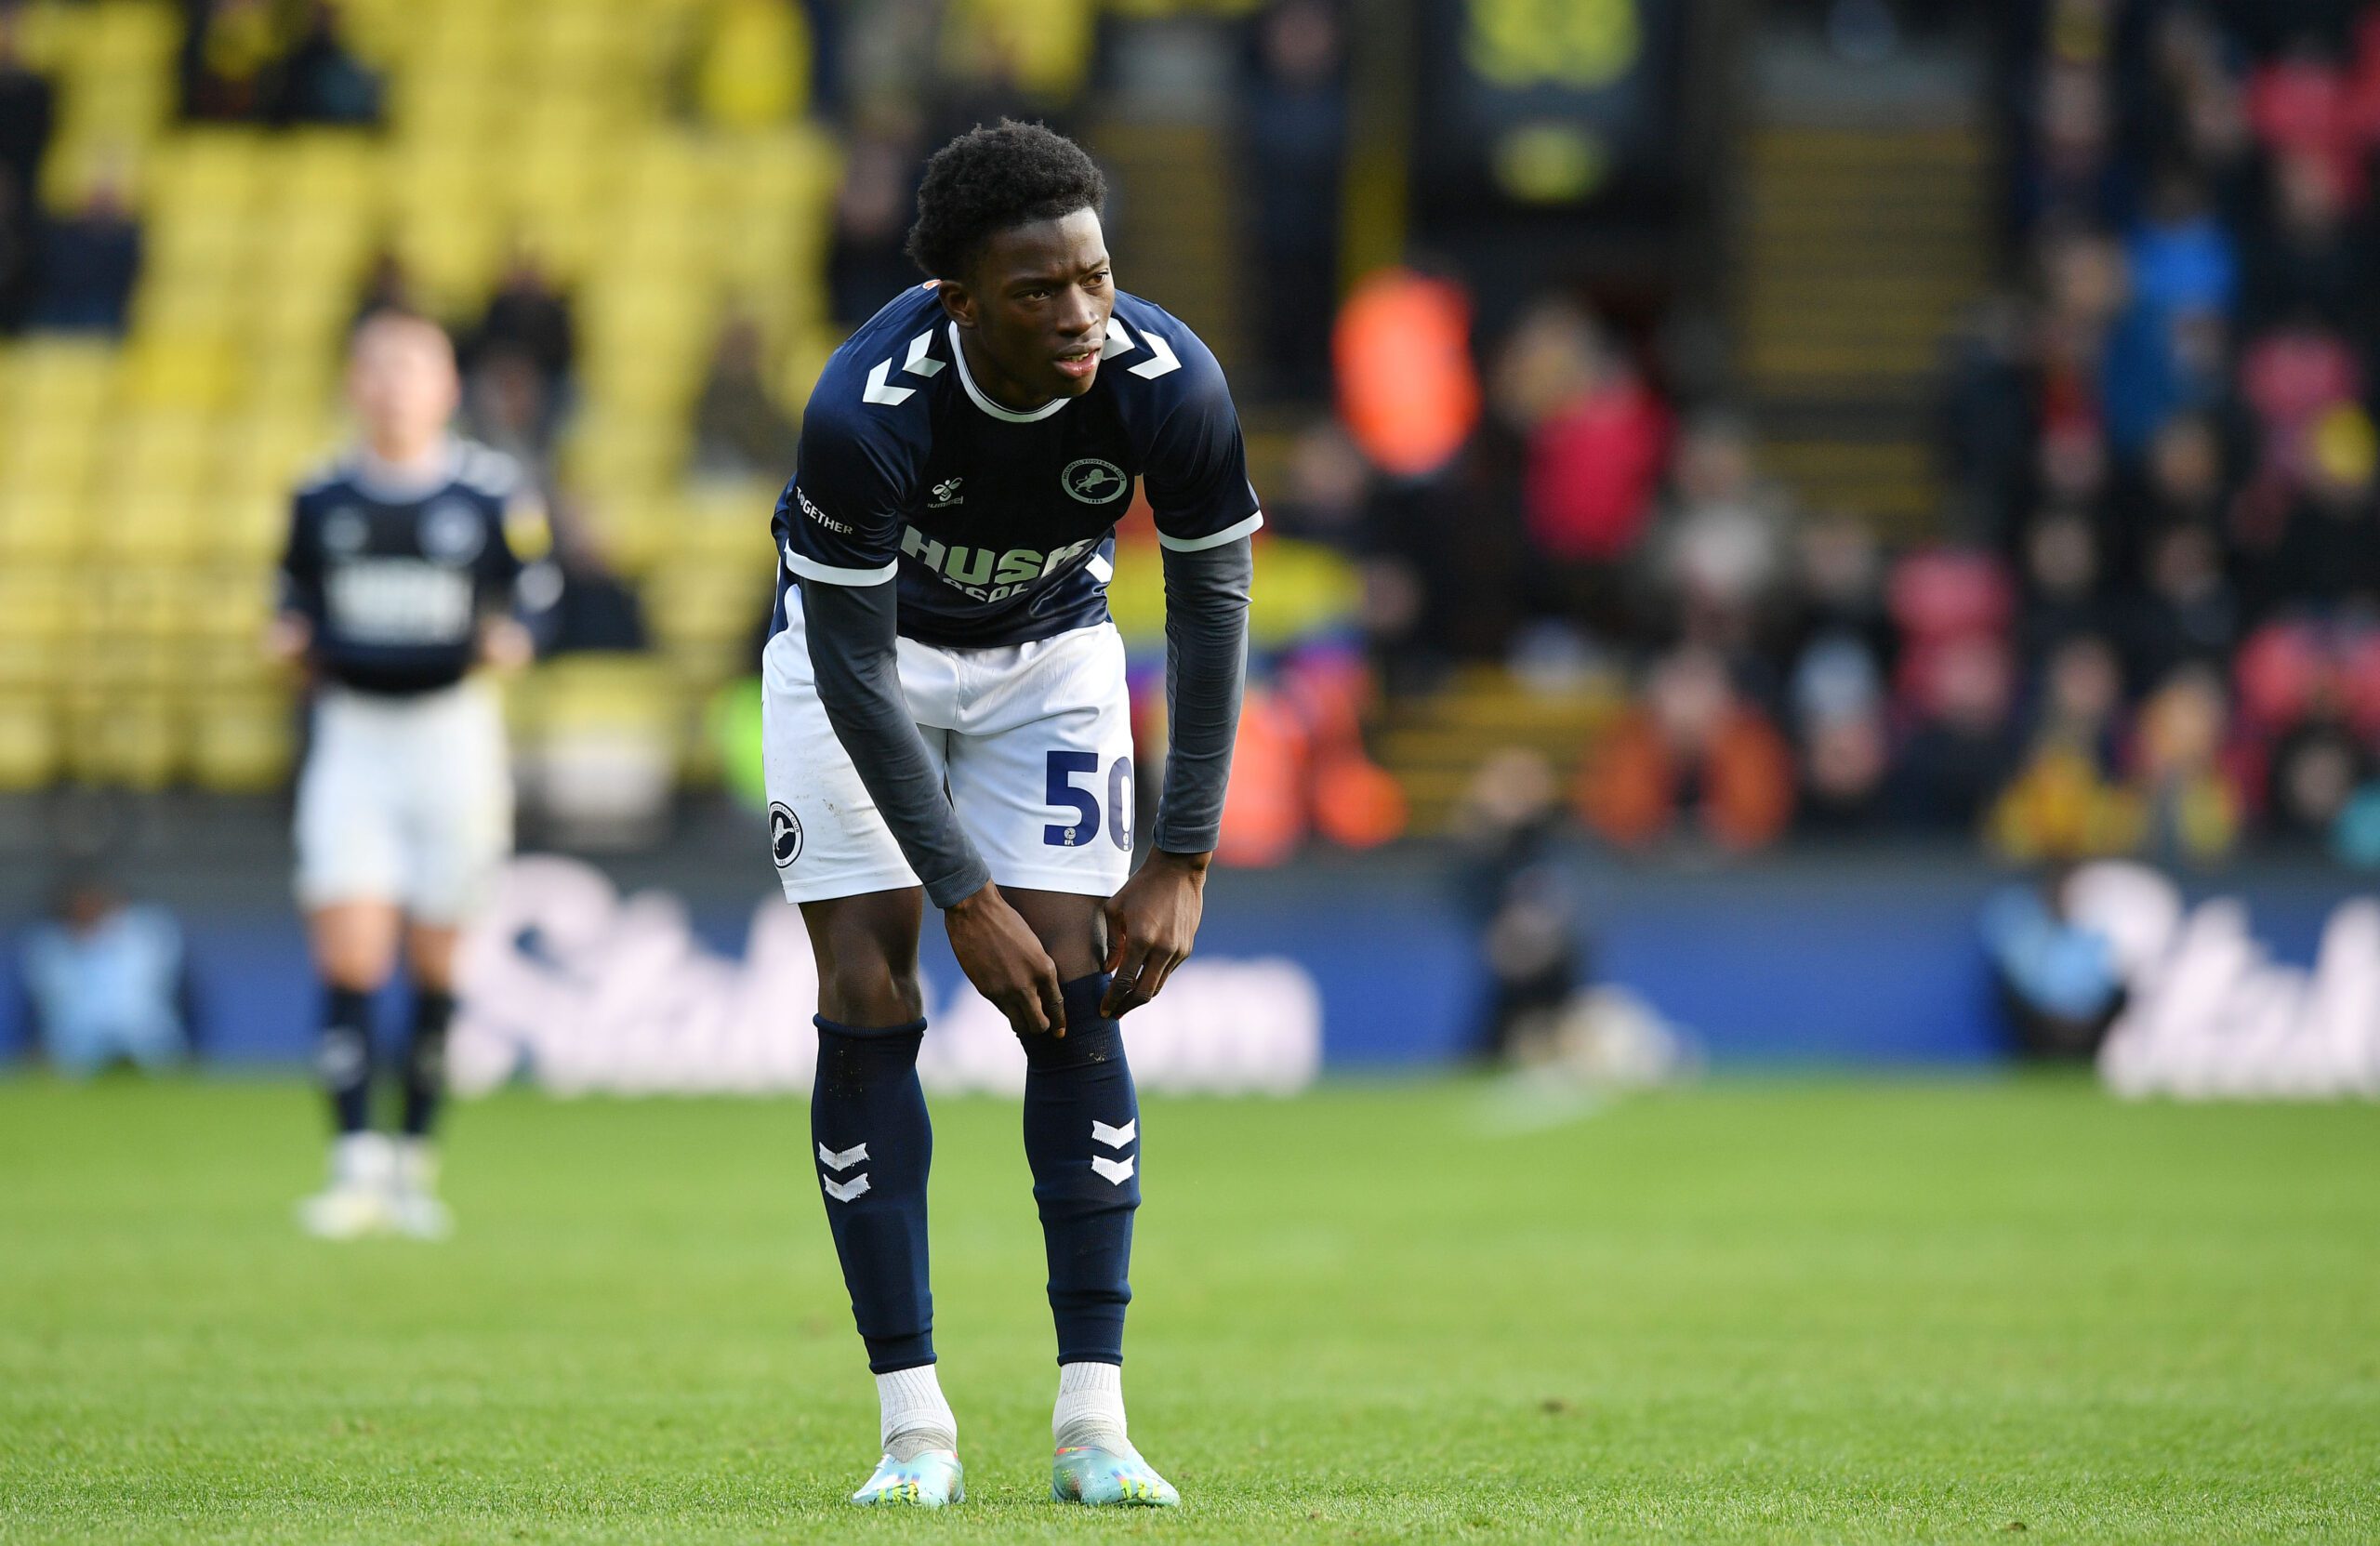 Millwall attacker set to leave club after bid accepted - Southwark News